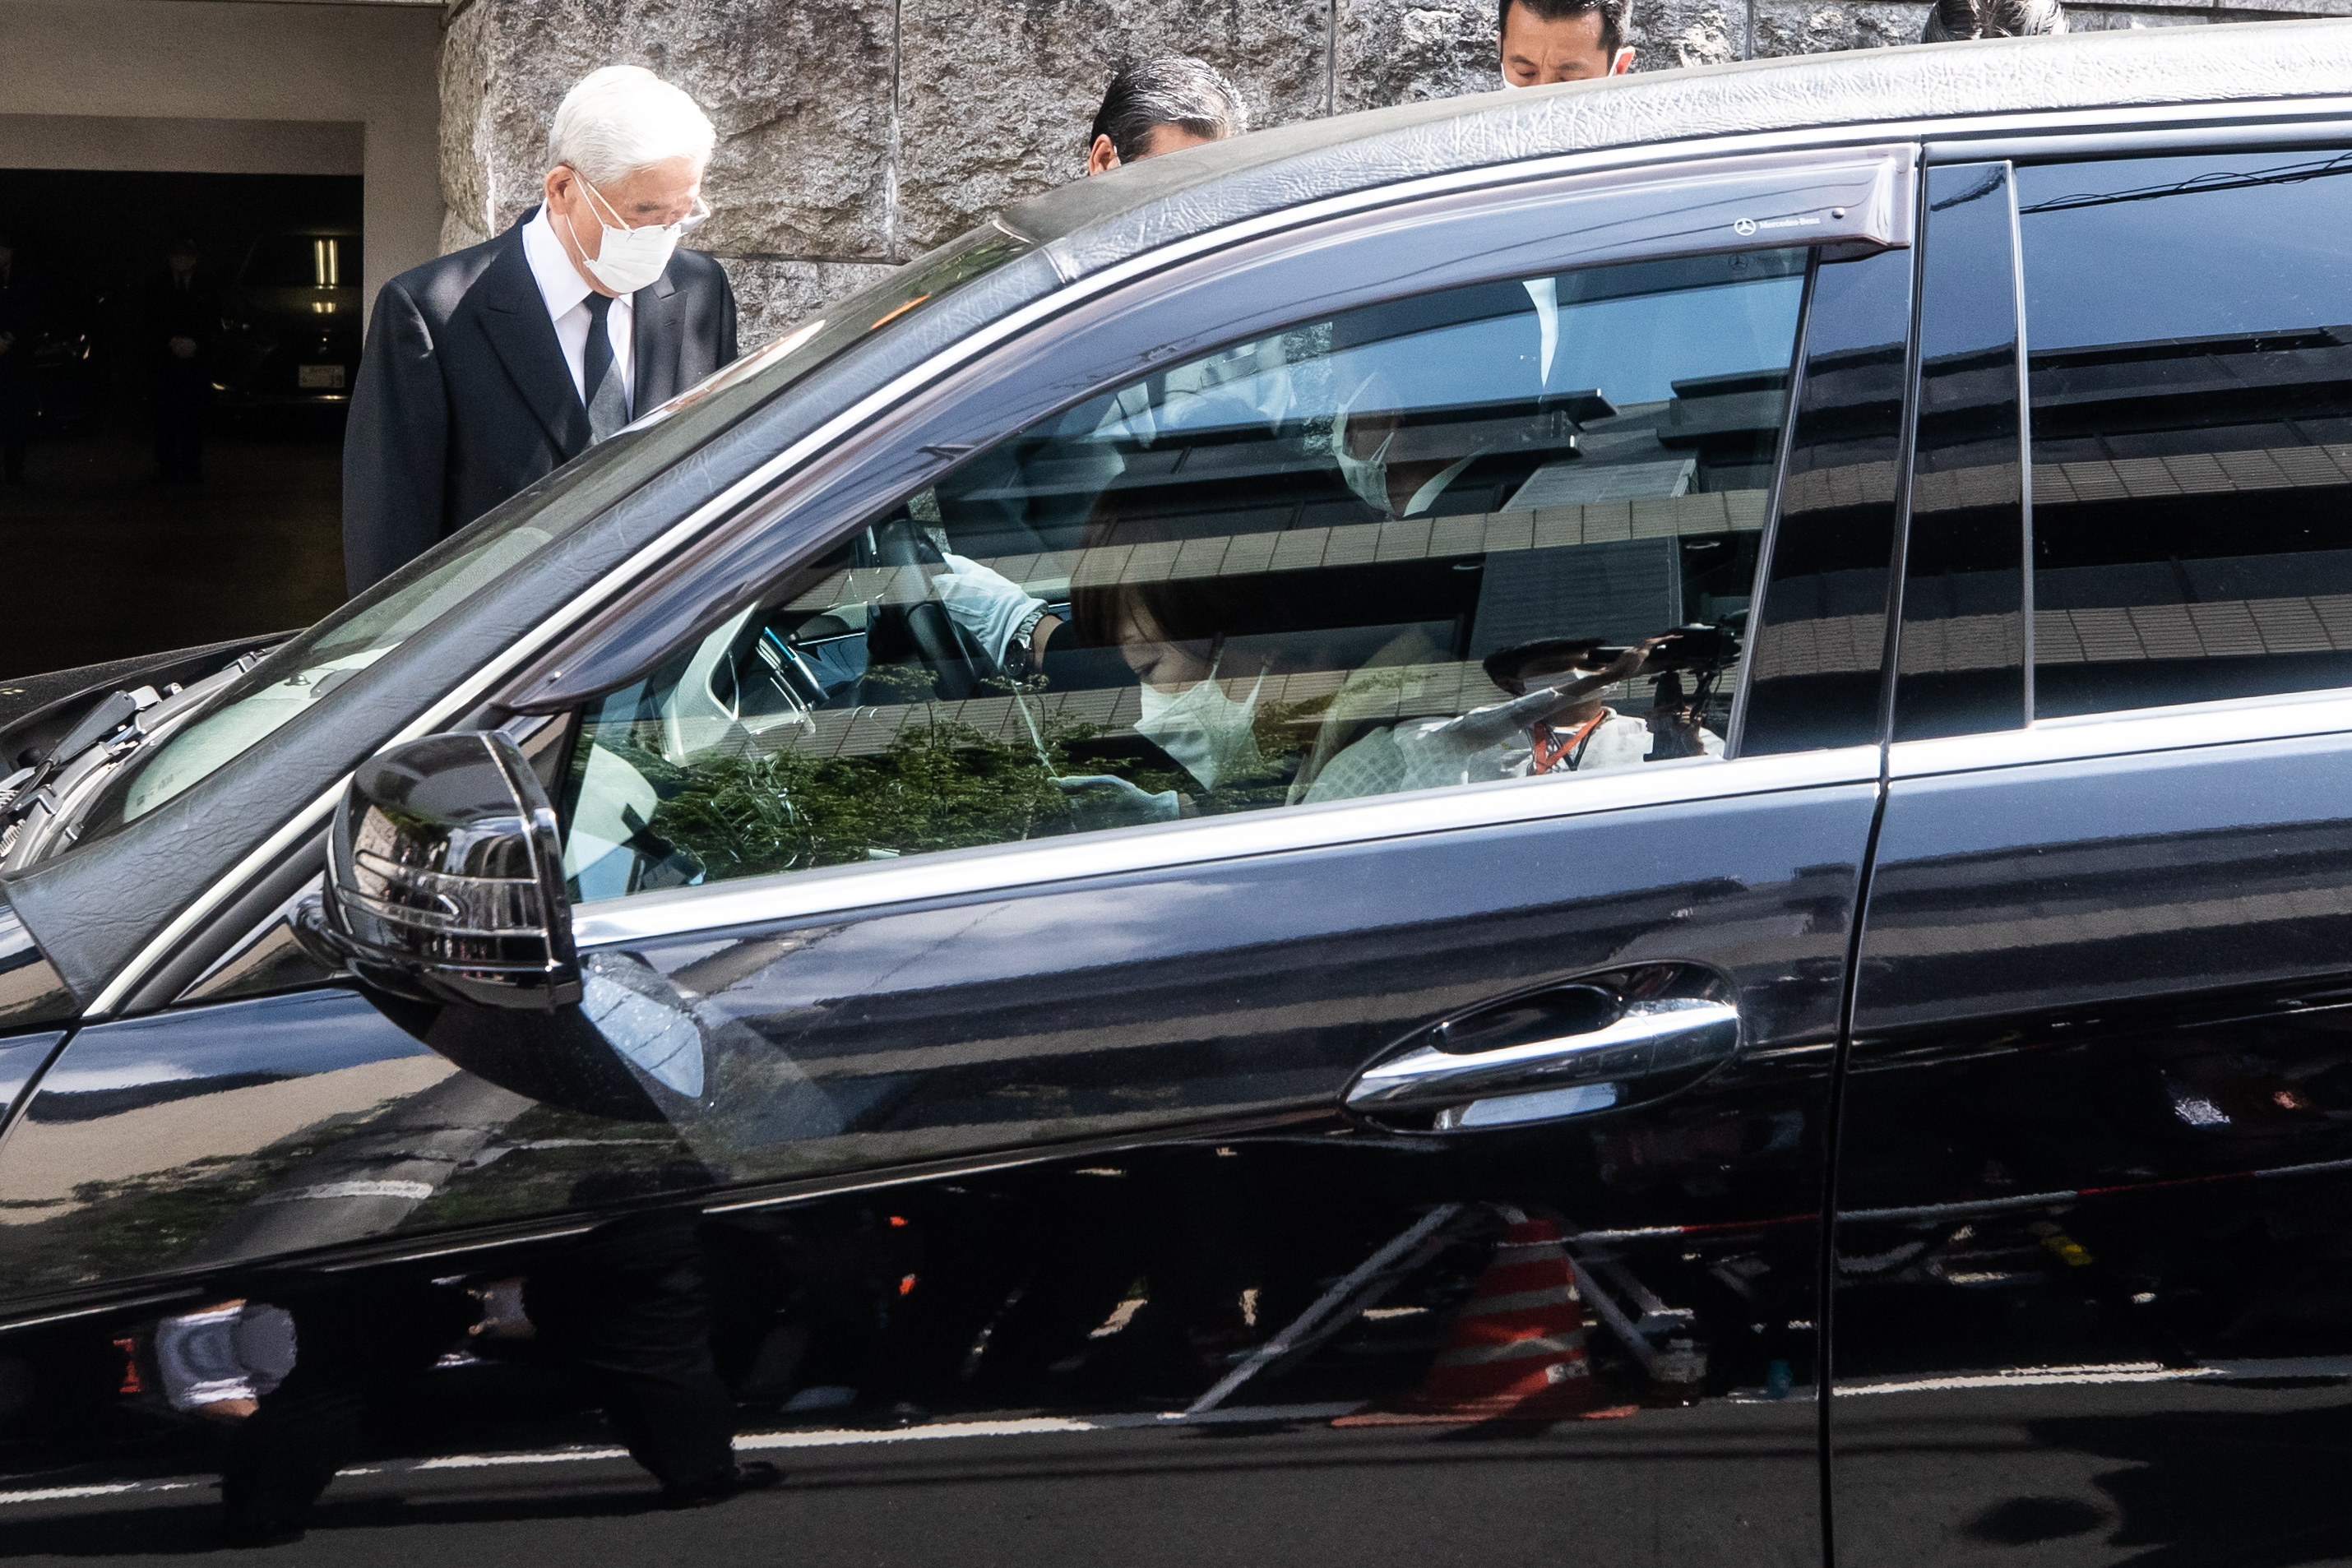 Akie Abe, wife of Shinzo Abe, is seen in the car carrying former Prime Minister Abe’s body and arrives at their home in Tokyo, Japan on Saturday.